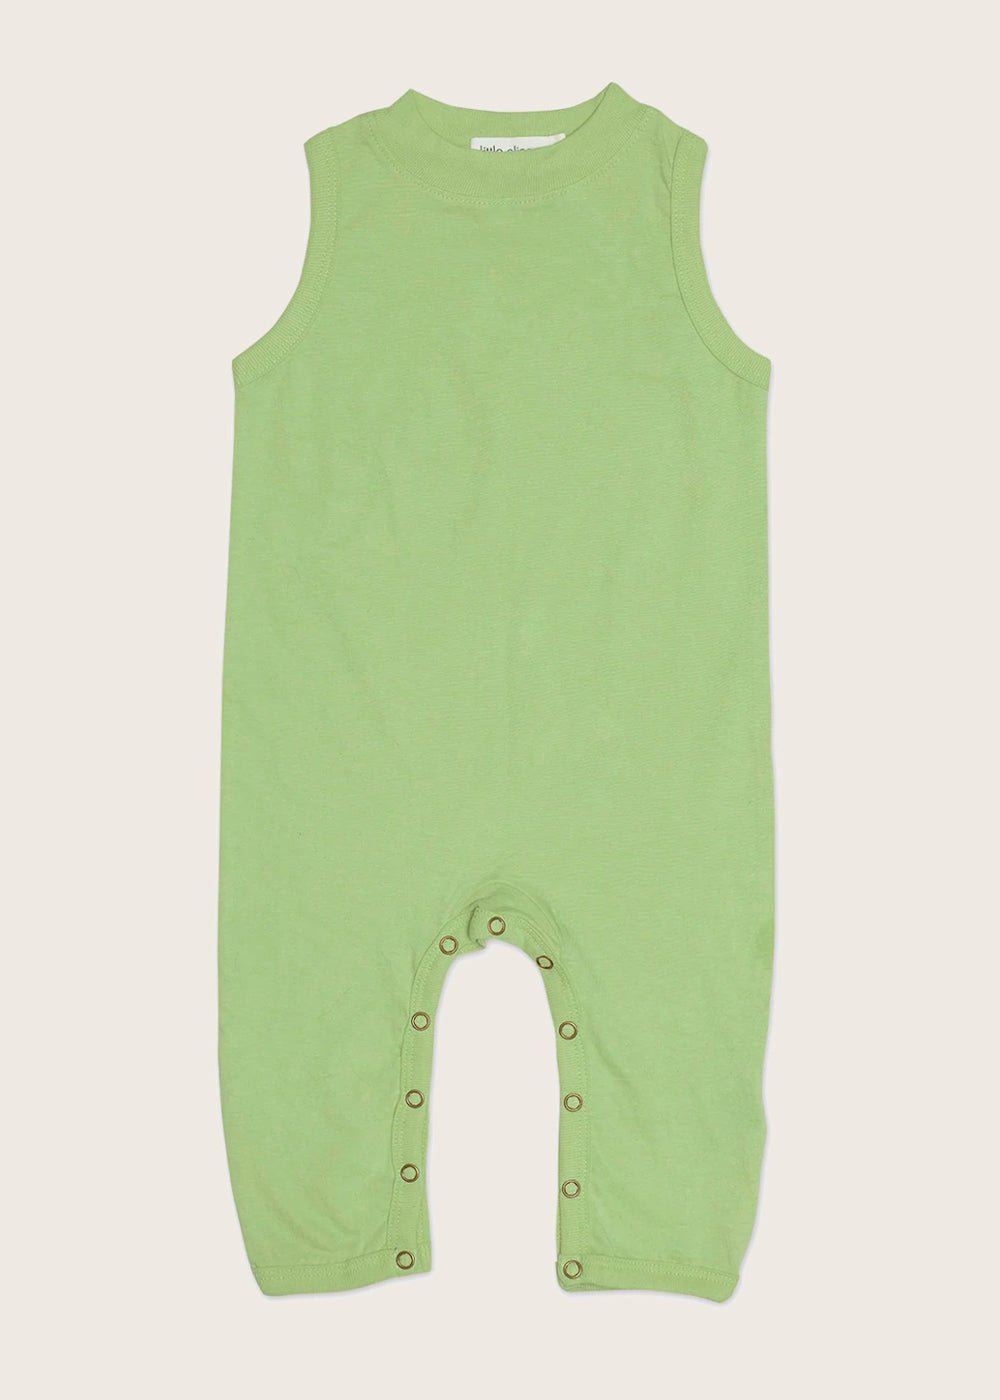 Little Elinor by NICO Sage Baby Romper - New Classics Studios Sustainable Ethical Fashion Canada